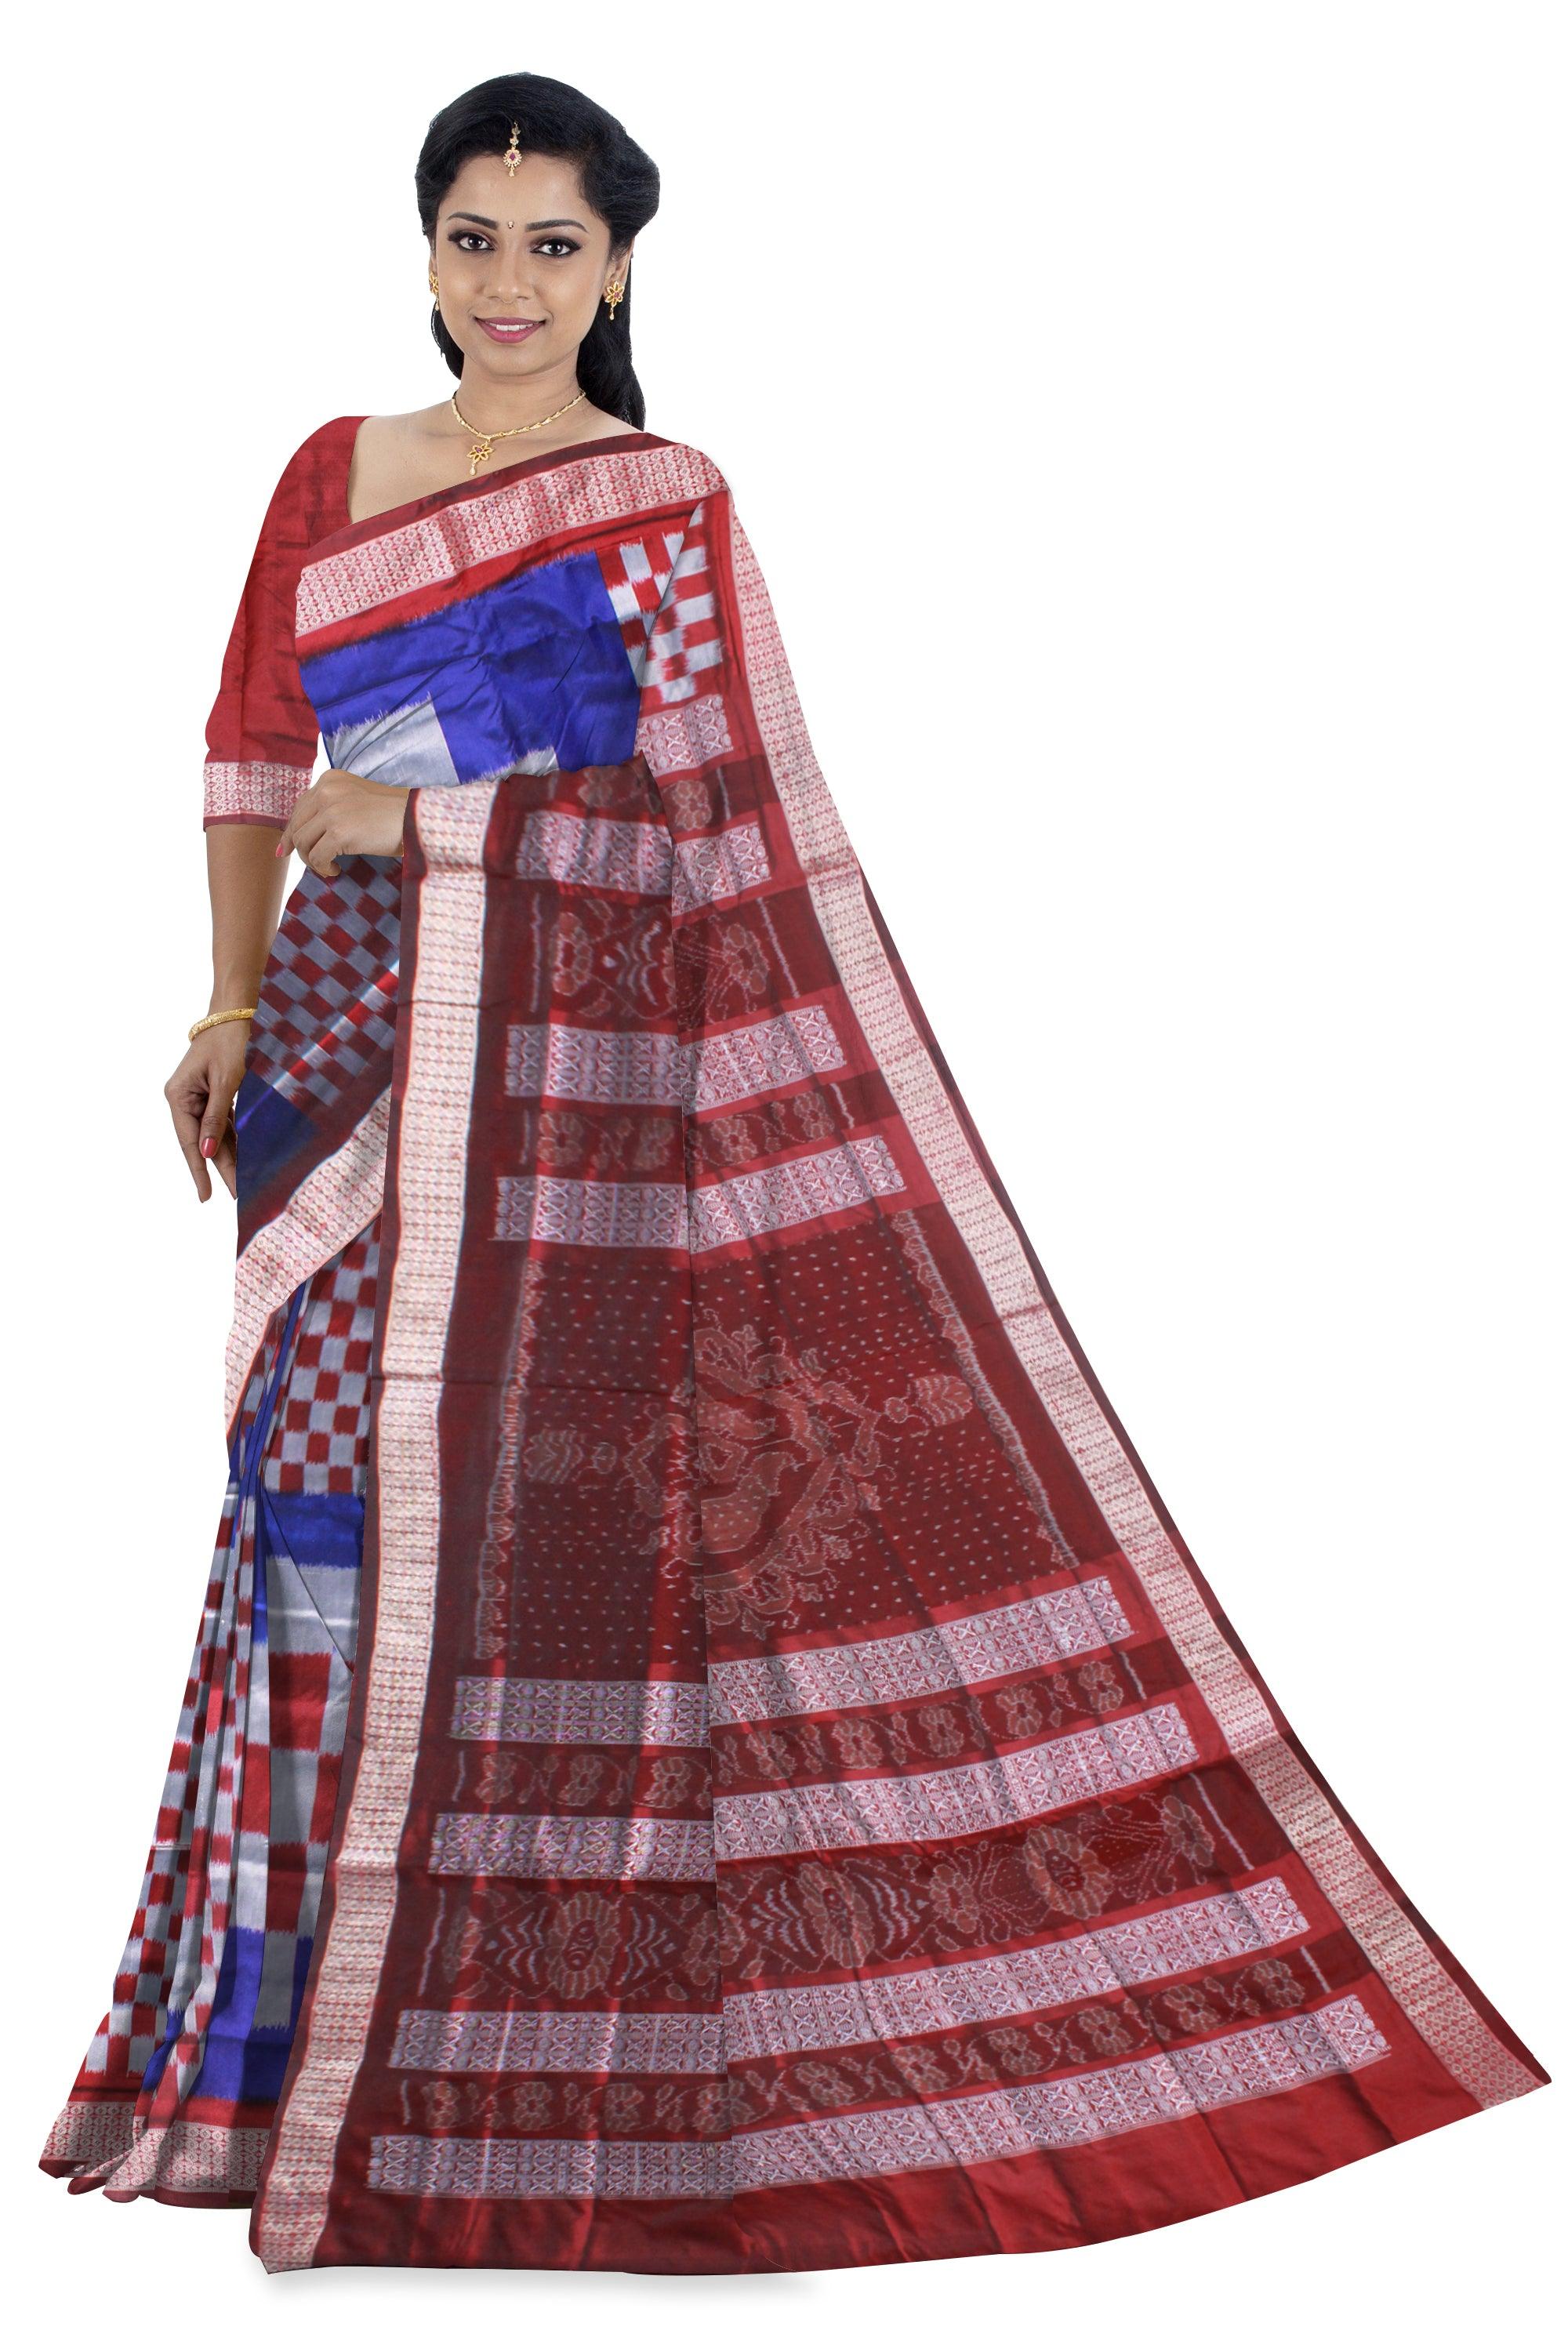 FULL BODY BIG PASAPALI PATTERN PATA SAREE IS PURPLE,SILVER AND MAROON COLOR BASE. ATTACHED WITH BLOUSE PIECE. - Koshali Arts & Crafts Enterprise